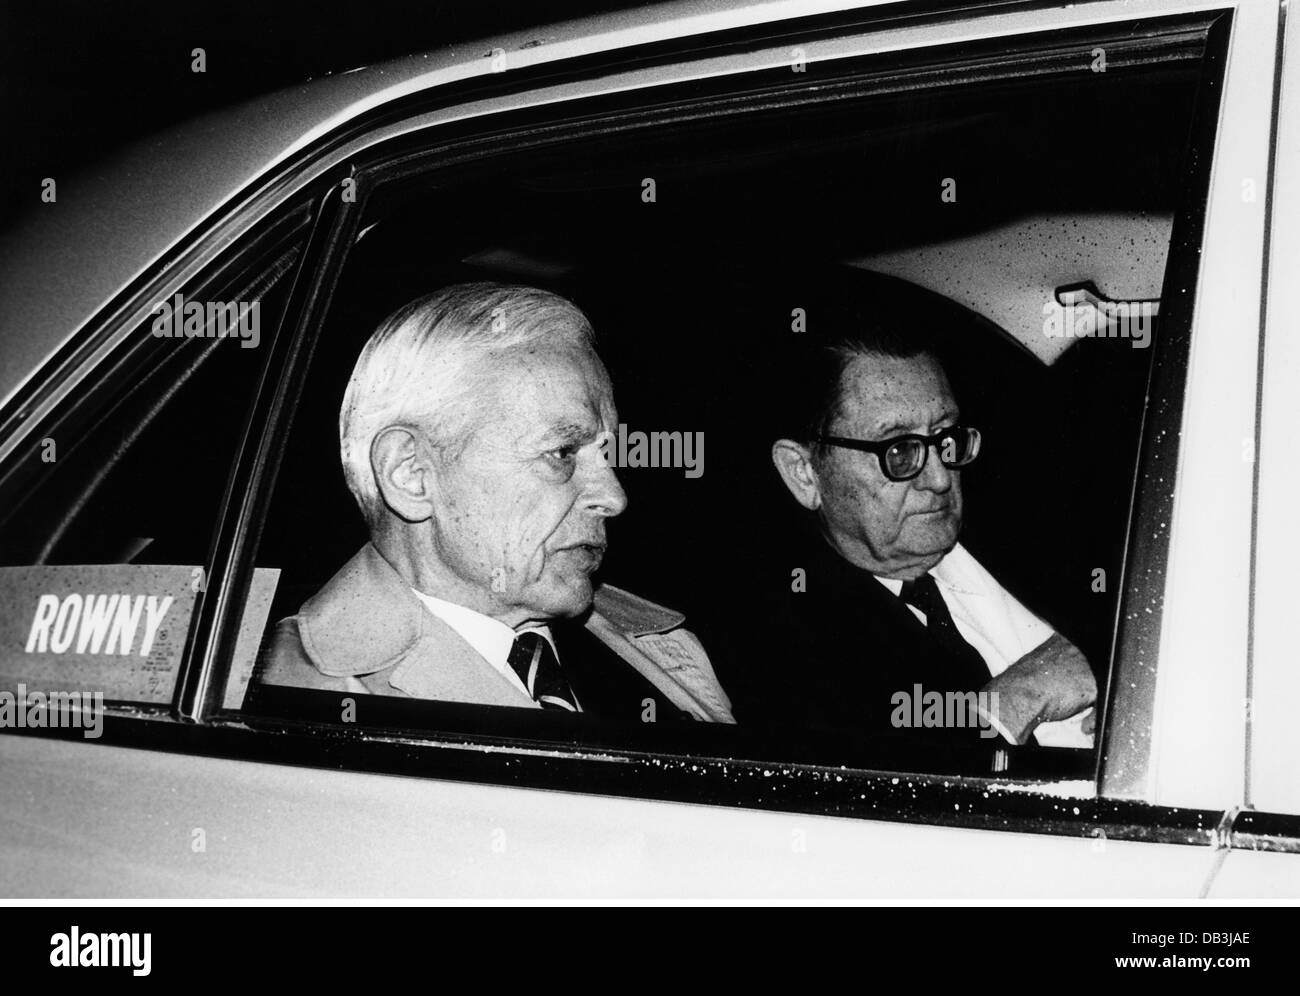 politics, conferences, summit USA - USSR, Geneva, Switzerland, 19./20.11.1985, member of the American delegation Paul Nitze and Edward Rowney in the car, 20.11.1985, conference, cold war, 1980s, 80s, 20th century, historic, historical, people, Additional-Rights-Clearences-Not Available Stock Photo